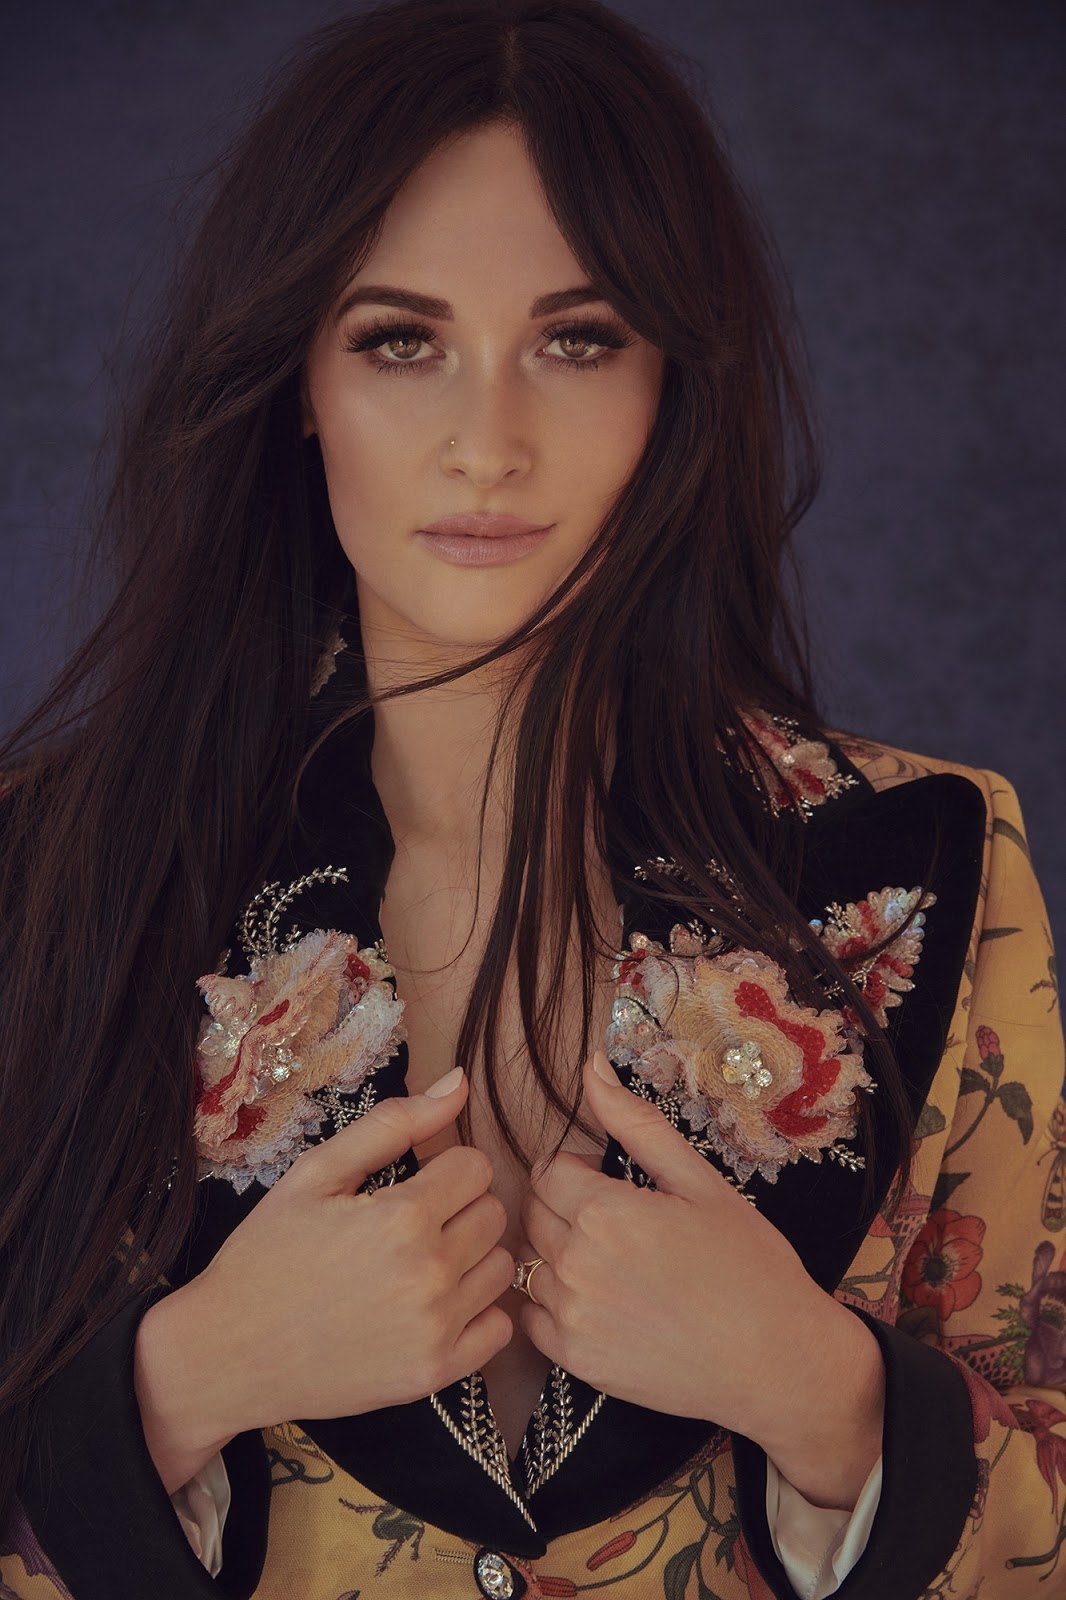 CoqCreative power by ProductionLink s.r.l. Kacey-Musgraves Kacey-Musgraves  Kacey-Musgraves